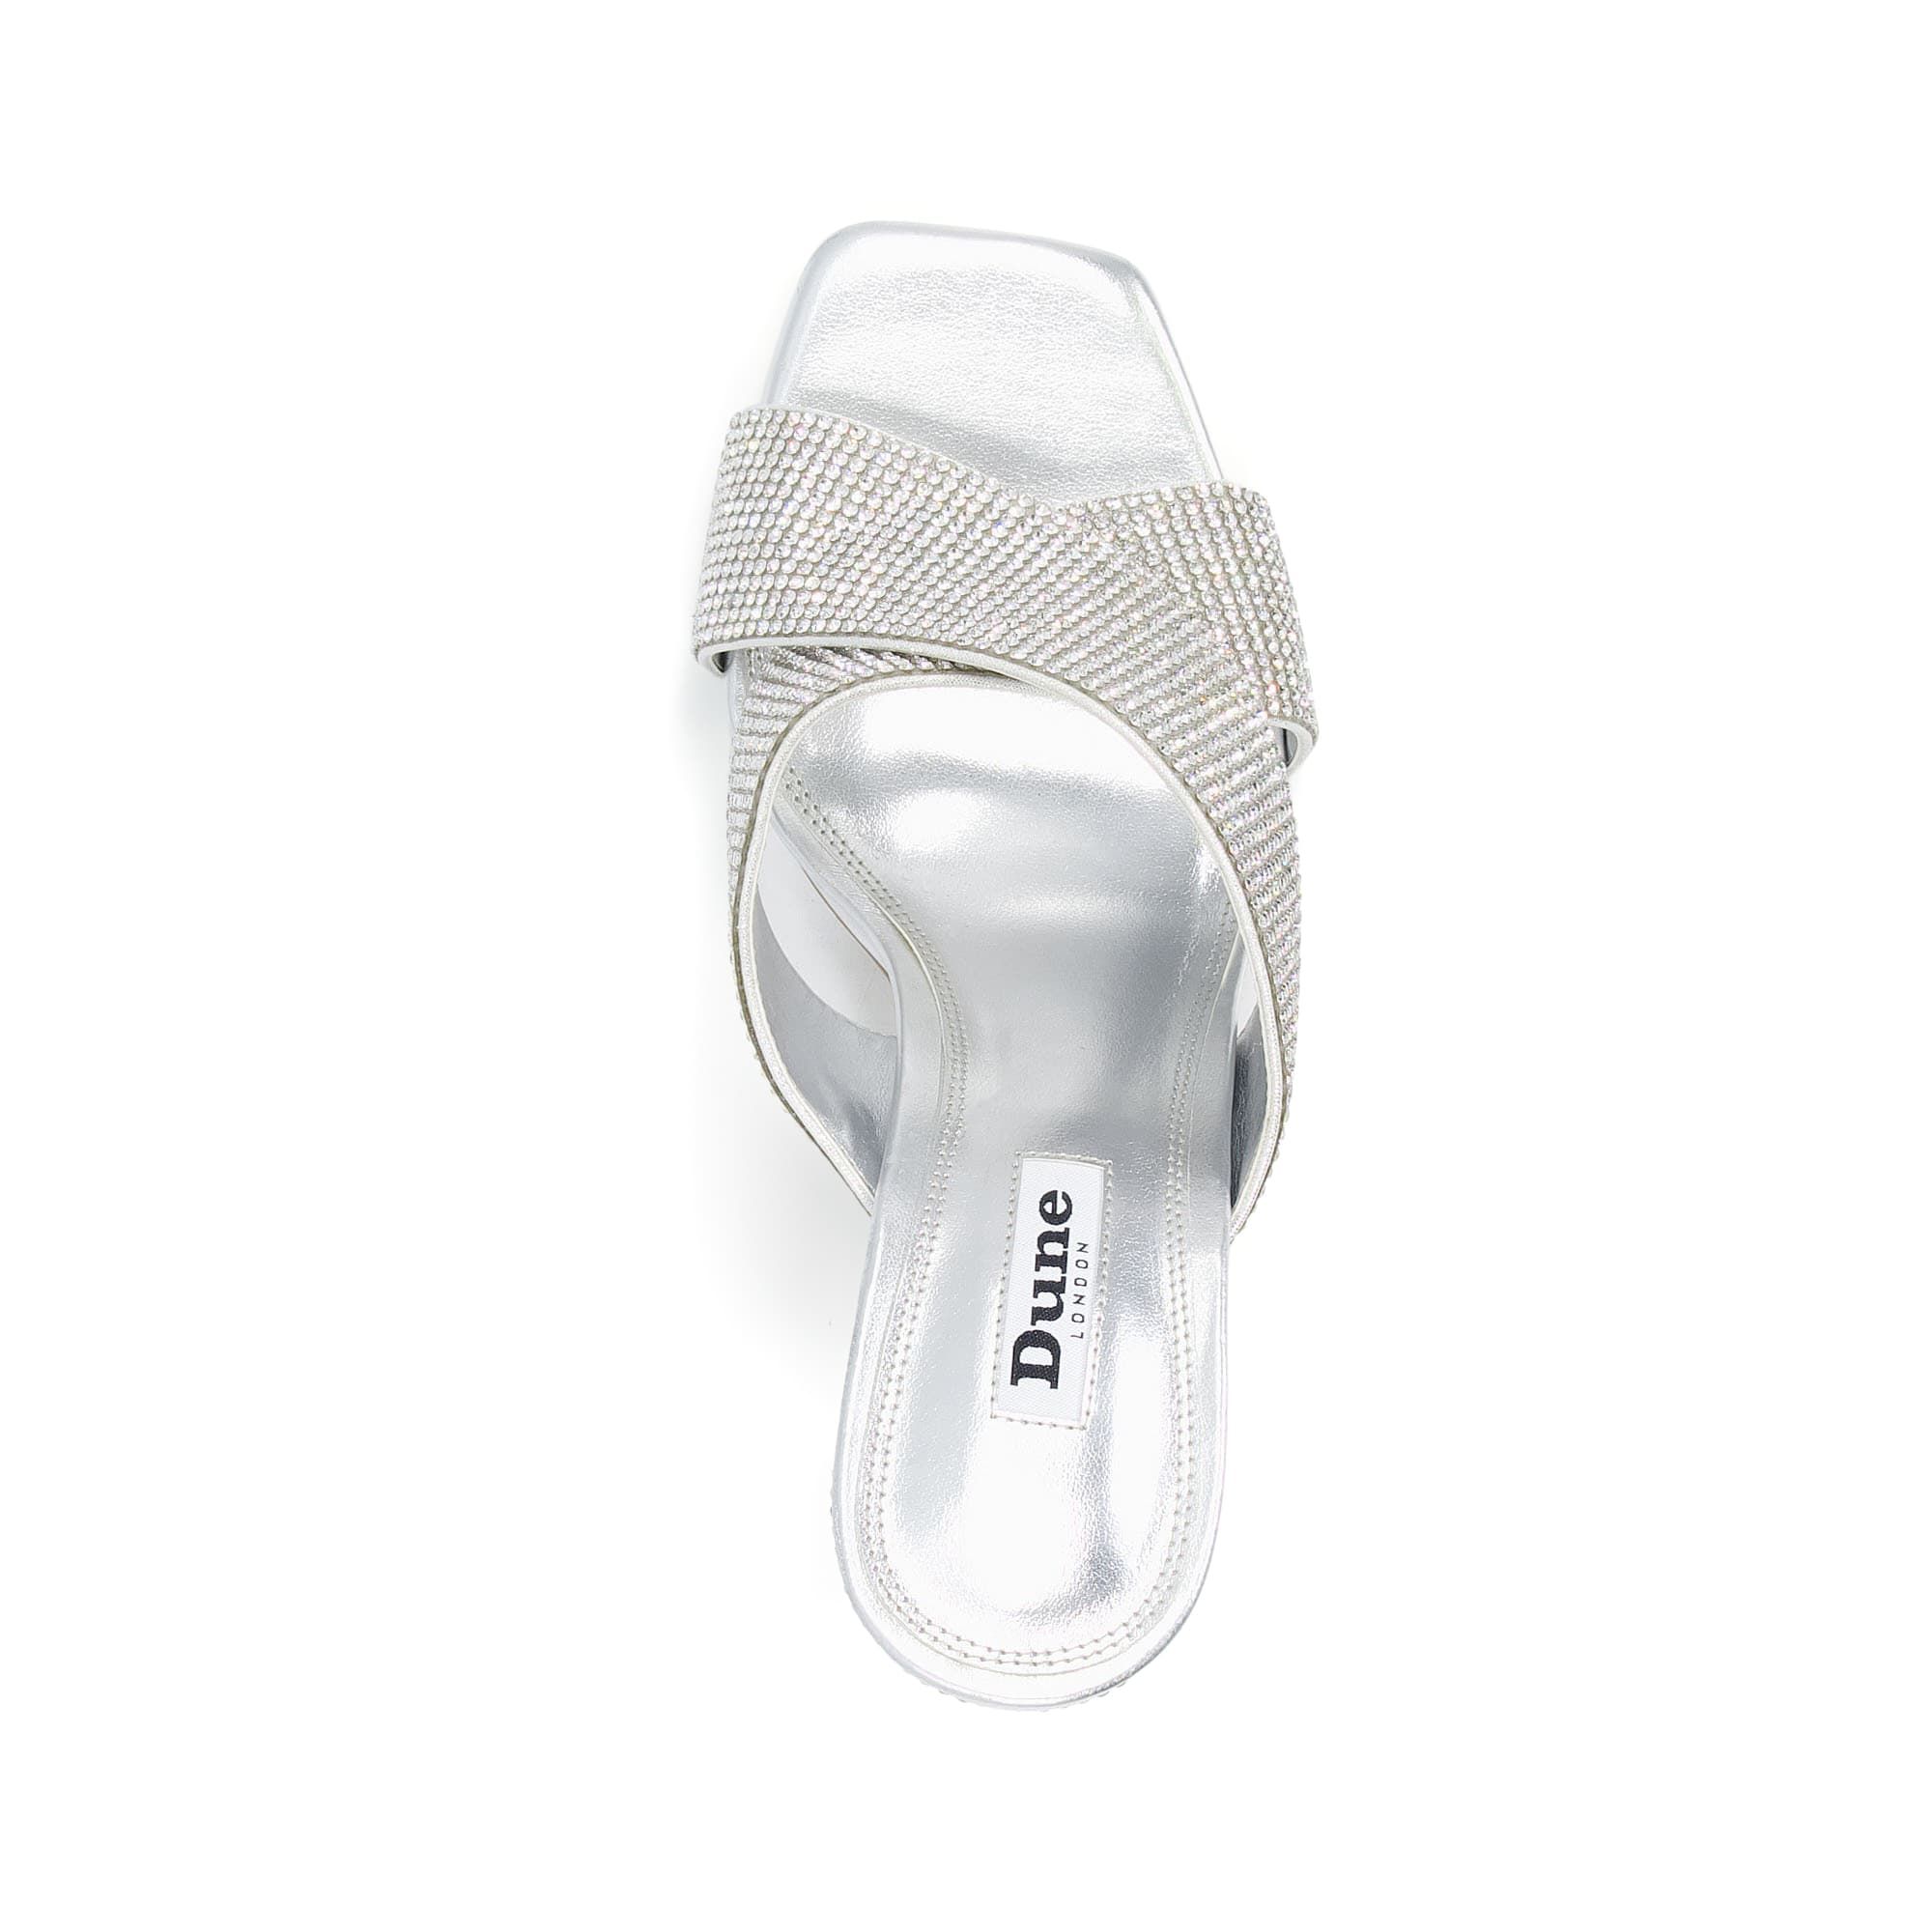 You know our mantra. If you're planning a look, start with the shoes. This heavily embellished style features a sparkly crystal design with a chic mule silhouette.  Whatever the occasion, these will elevate your look.